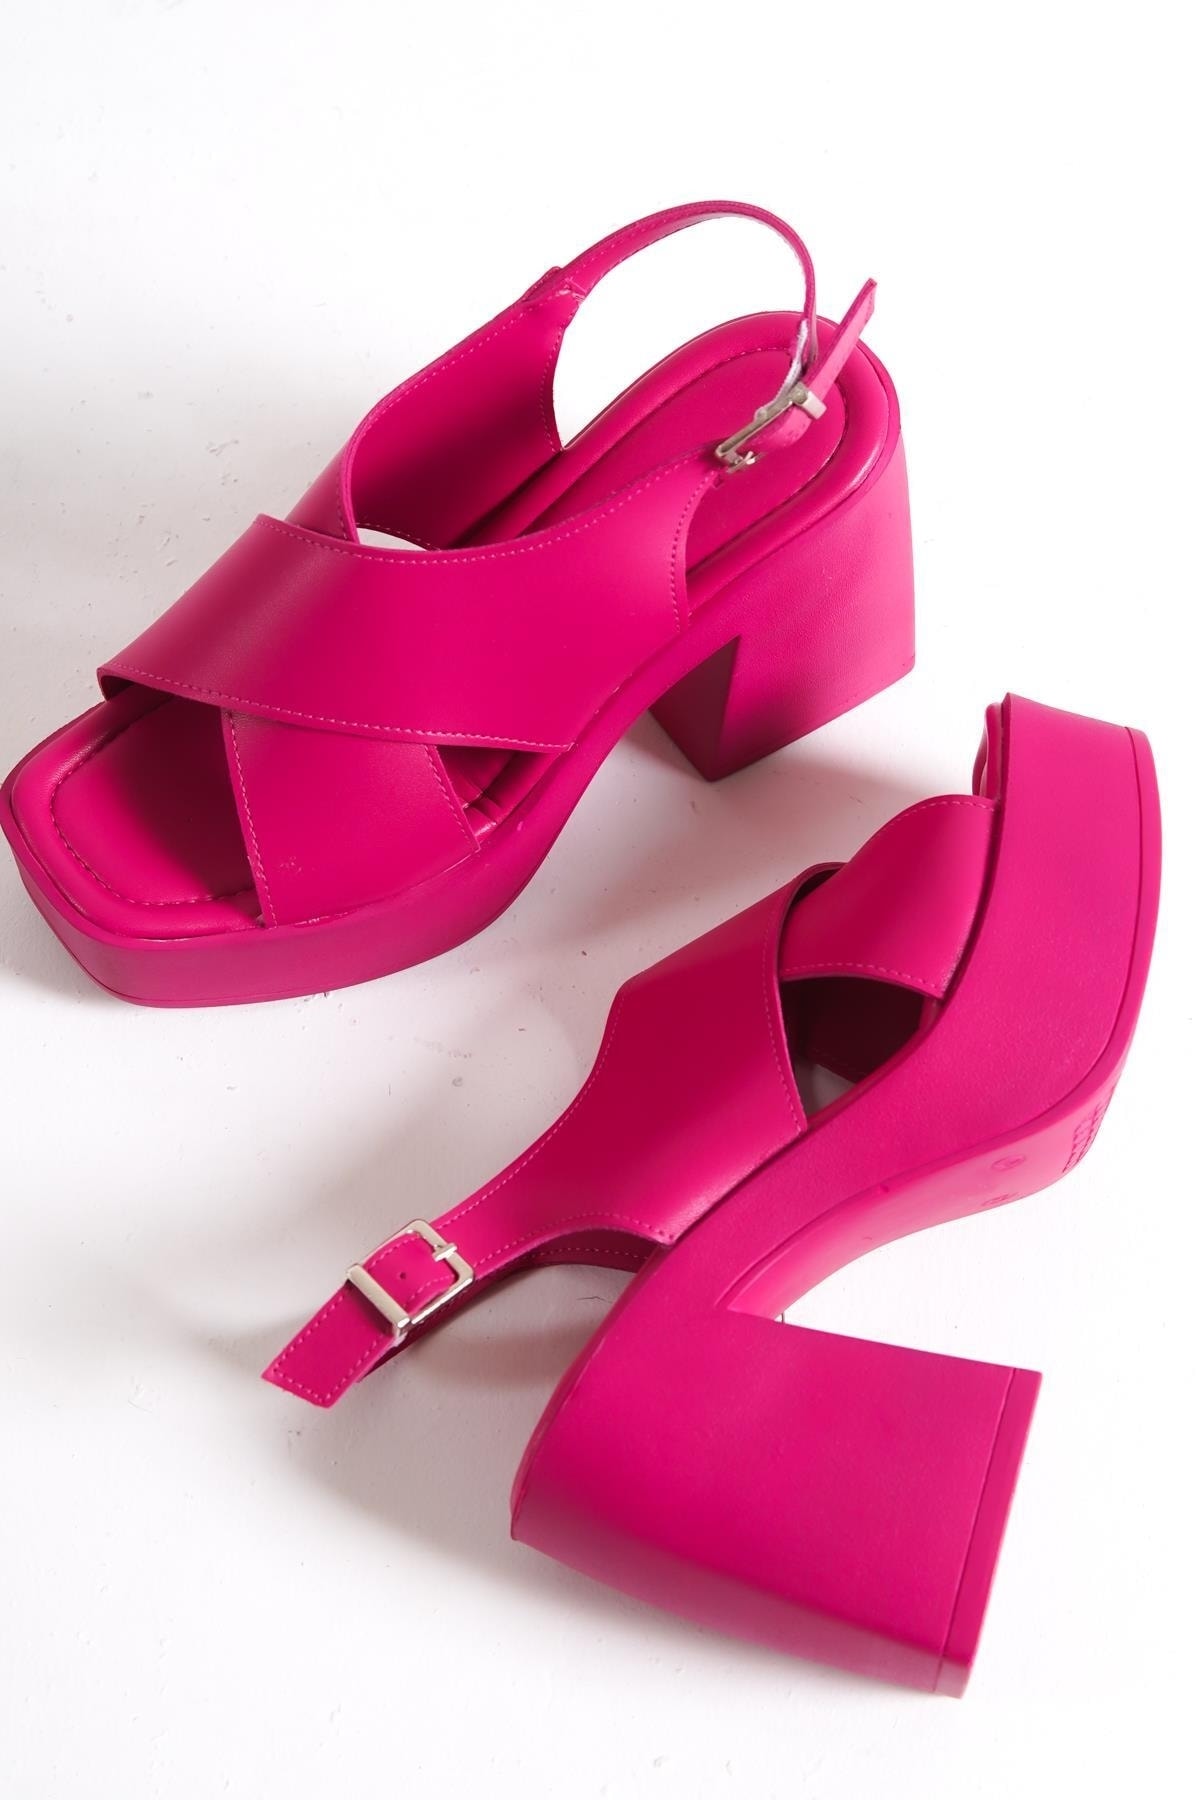 Capone Outfitters Capone Booty Toe Women's Crossover Wide Strap Platform Heels Fuchsia Women's Sandals